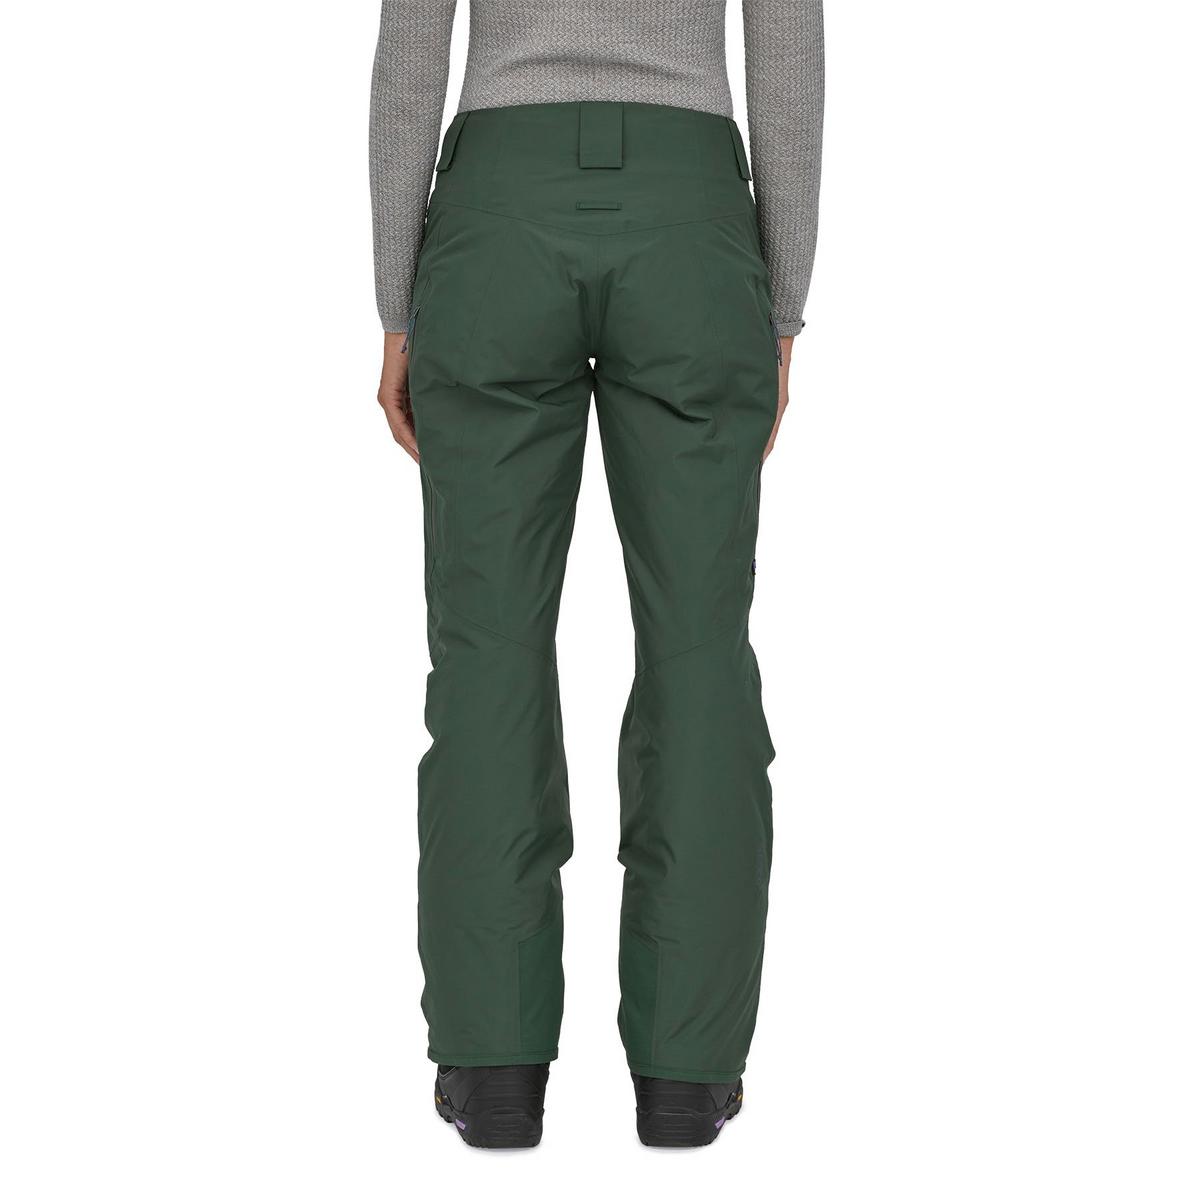 Patagonia Women's Insulated Powder Town Pants - Sequoia Red